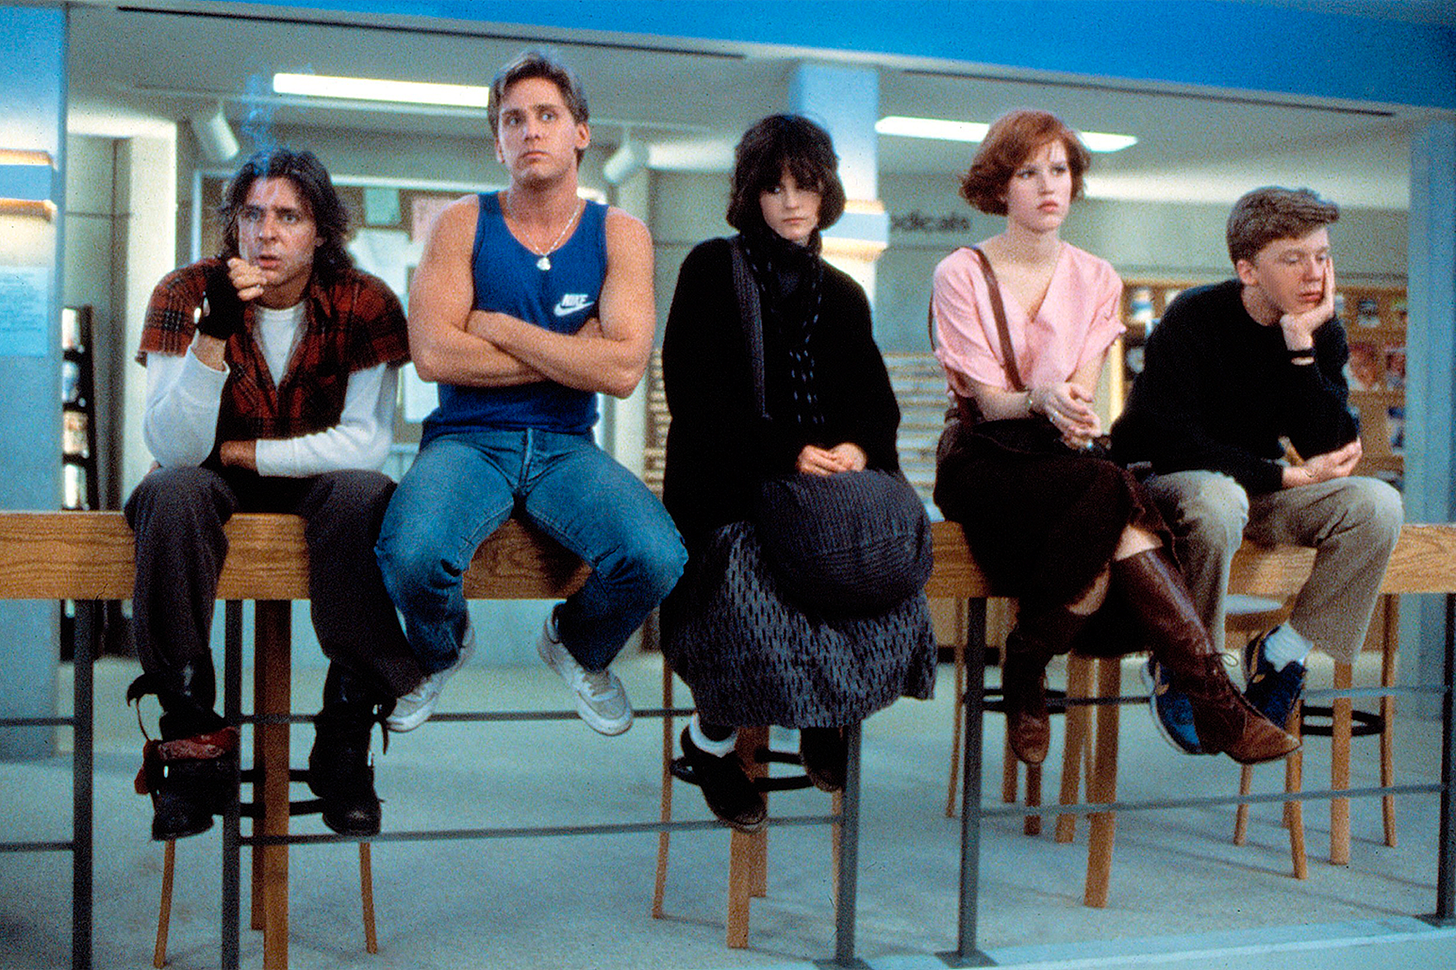 The Breakfast Club. Gen Xers, the lot of them.